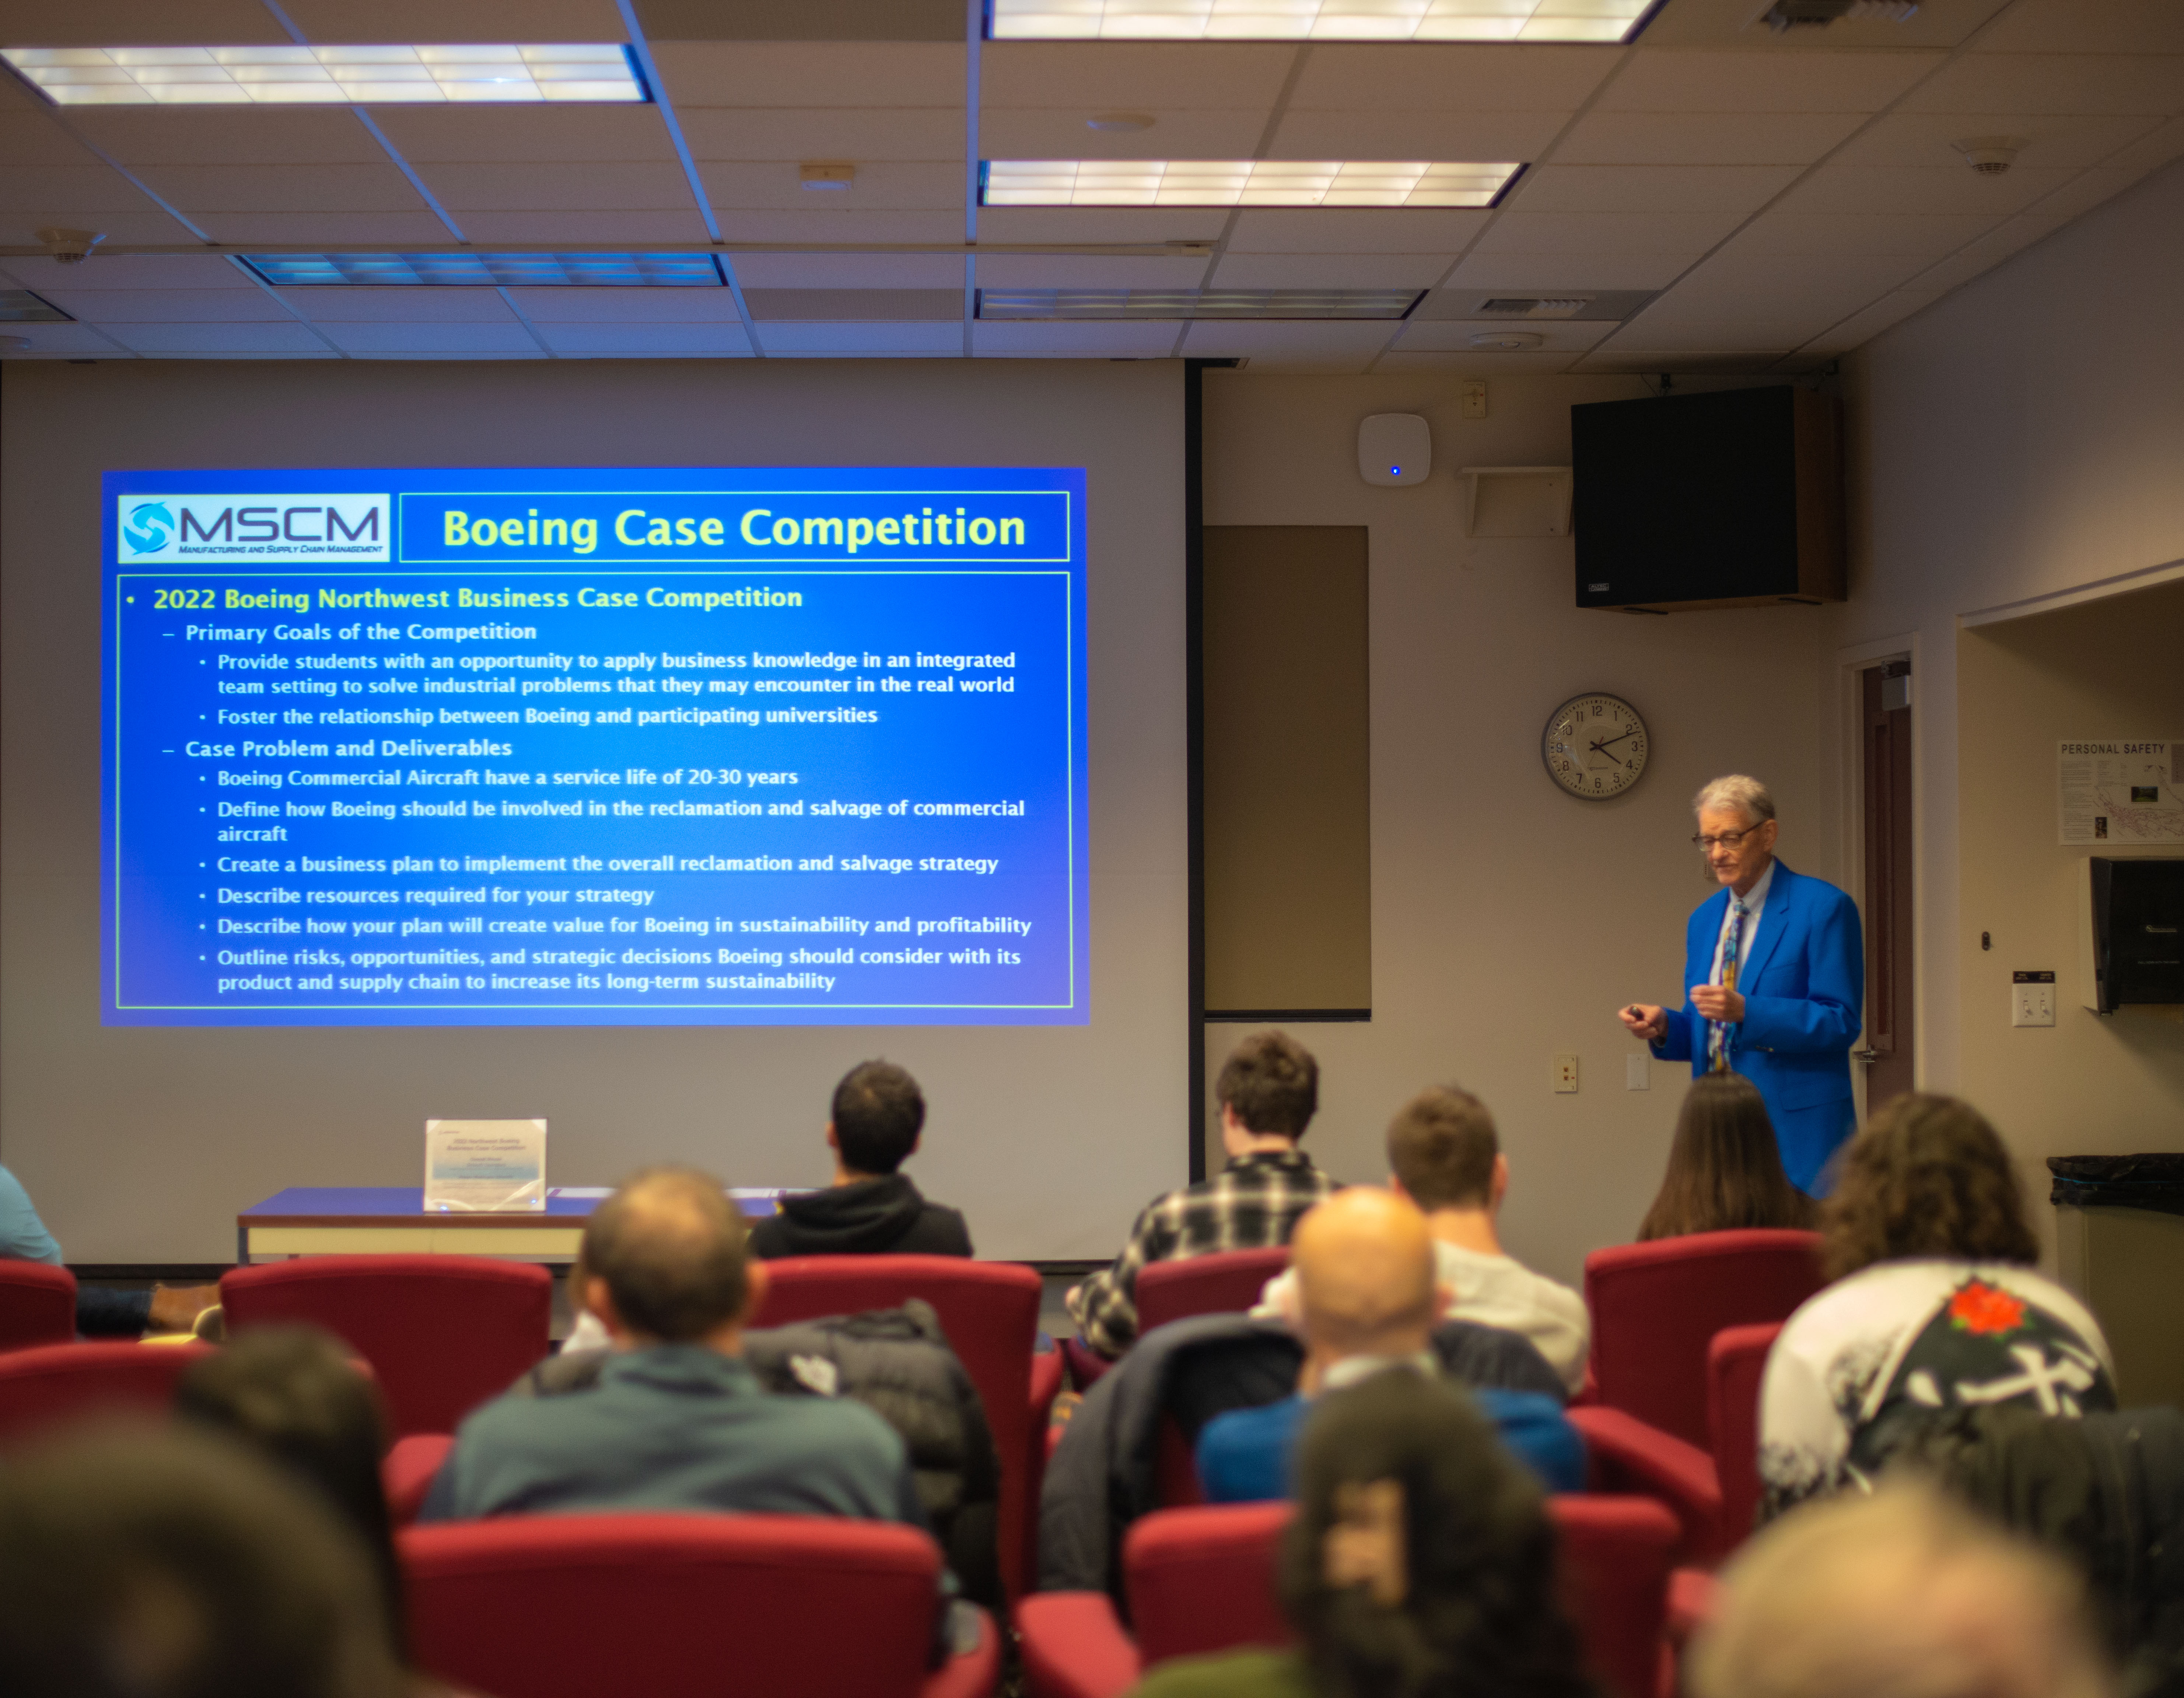 Peter Haug, the MSCM Program Director, presenting the Boeing Case Competition WWU winners